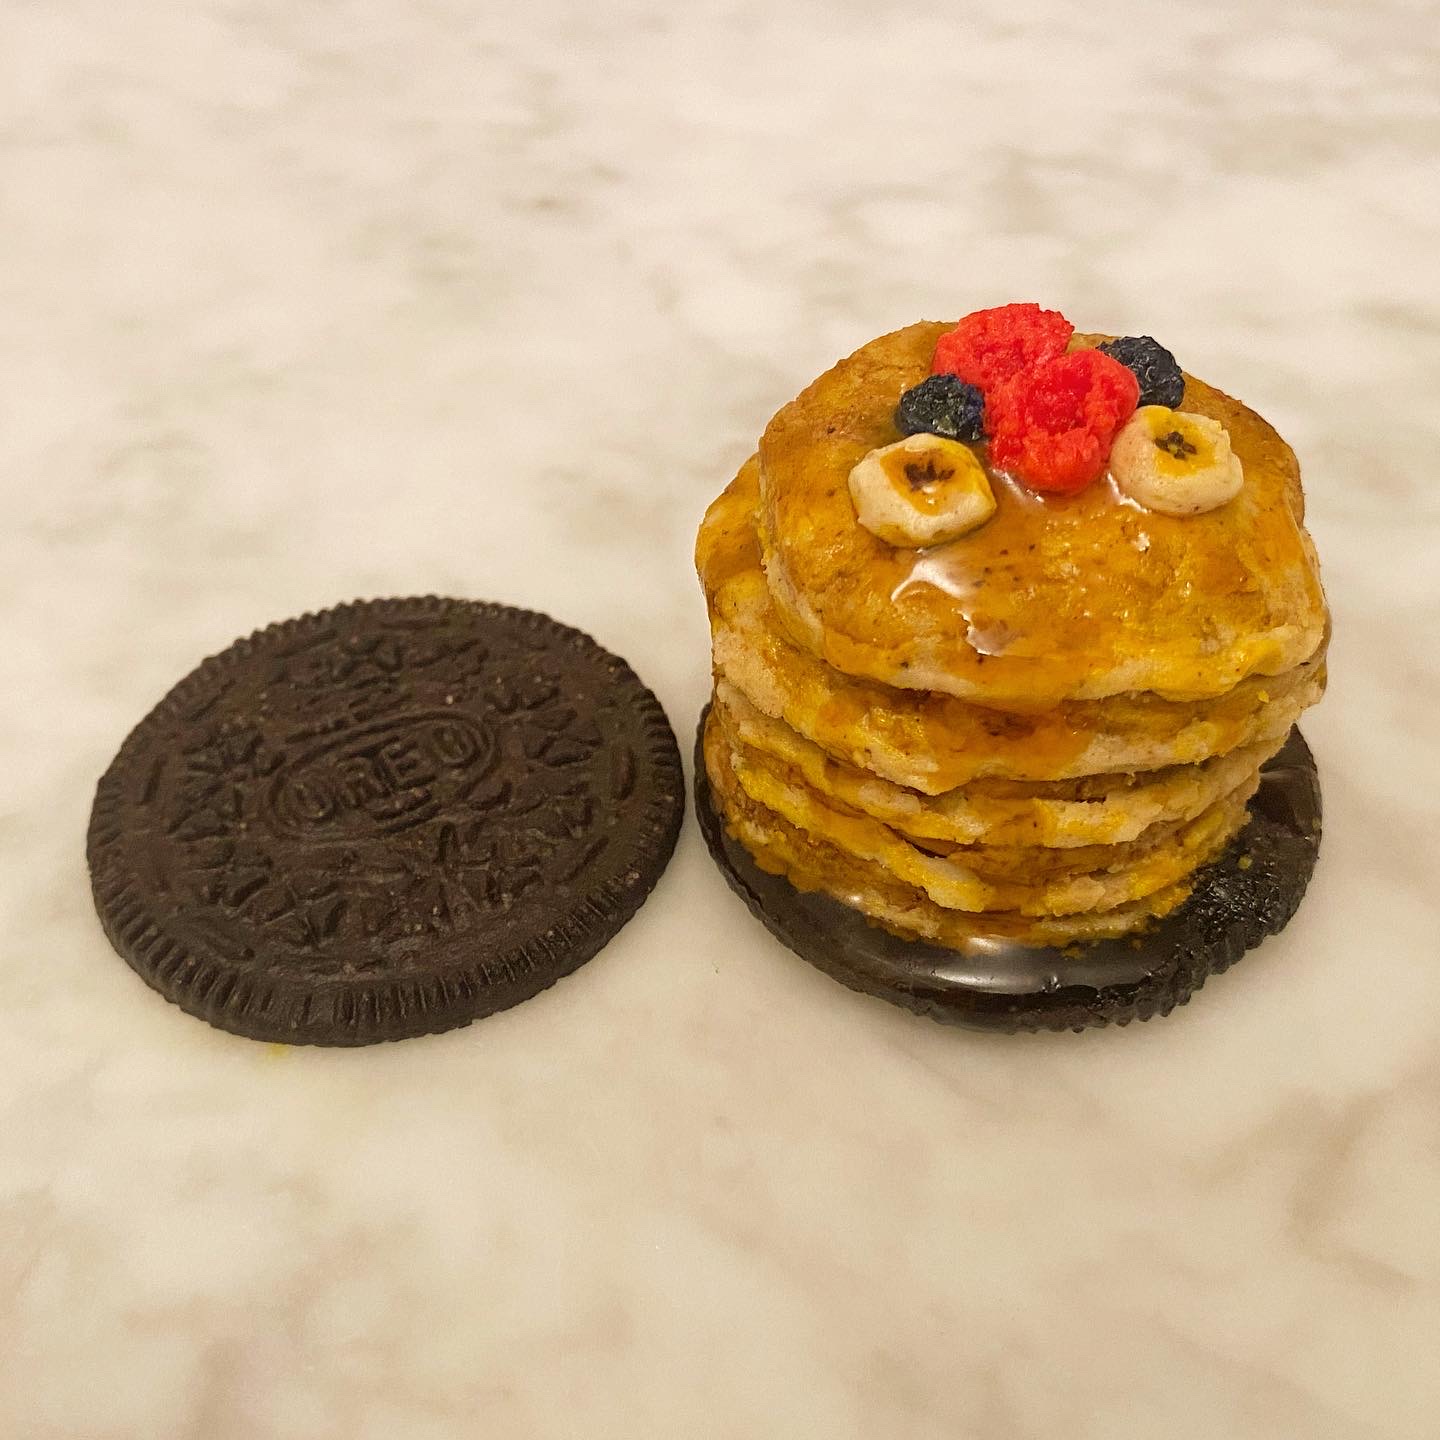 Pancake stack – dyed Oreo cream plated on Oreo cookie by Harley Langberg